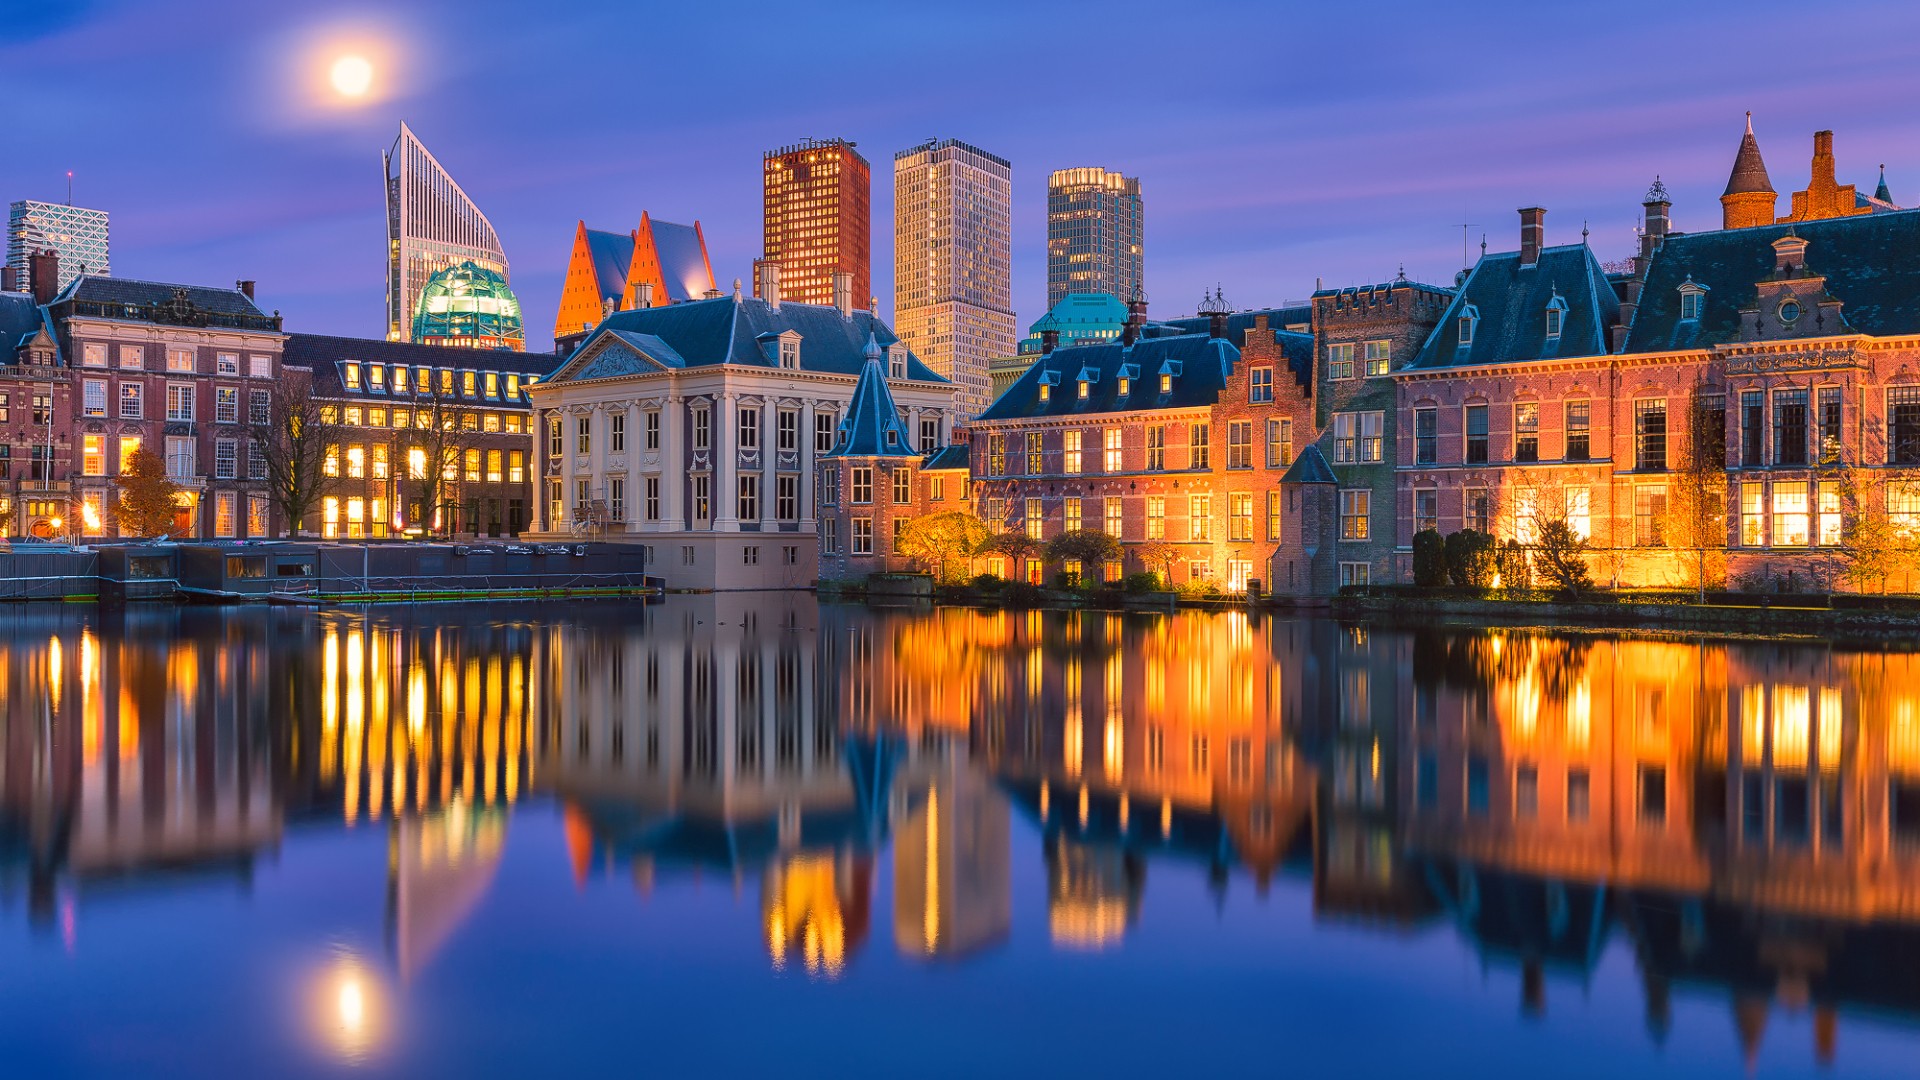 architecture, Building, City, Cityscape, Haag, Netherlands, River, Water, Reflection, House, Old building, Night, Evening, Lights, Trees, Skyscraper, Moon, Moonlight, Clouds Wallpaper